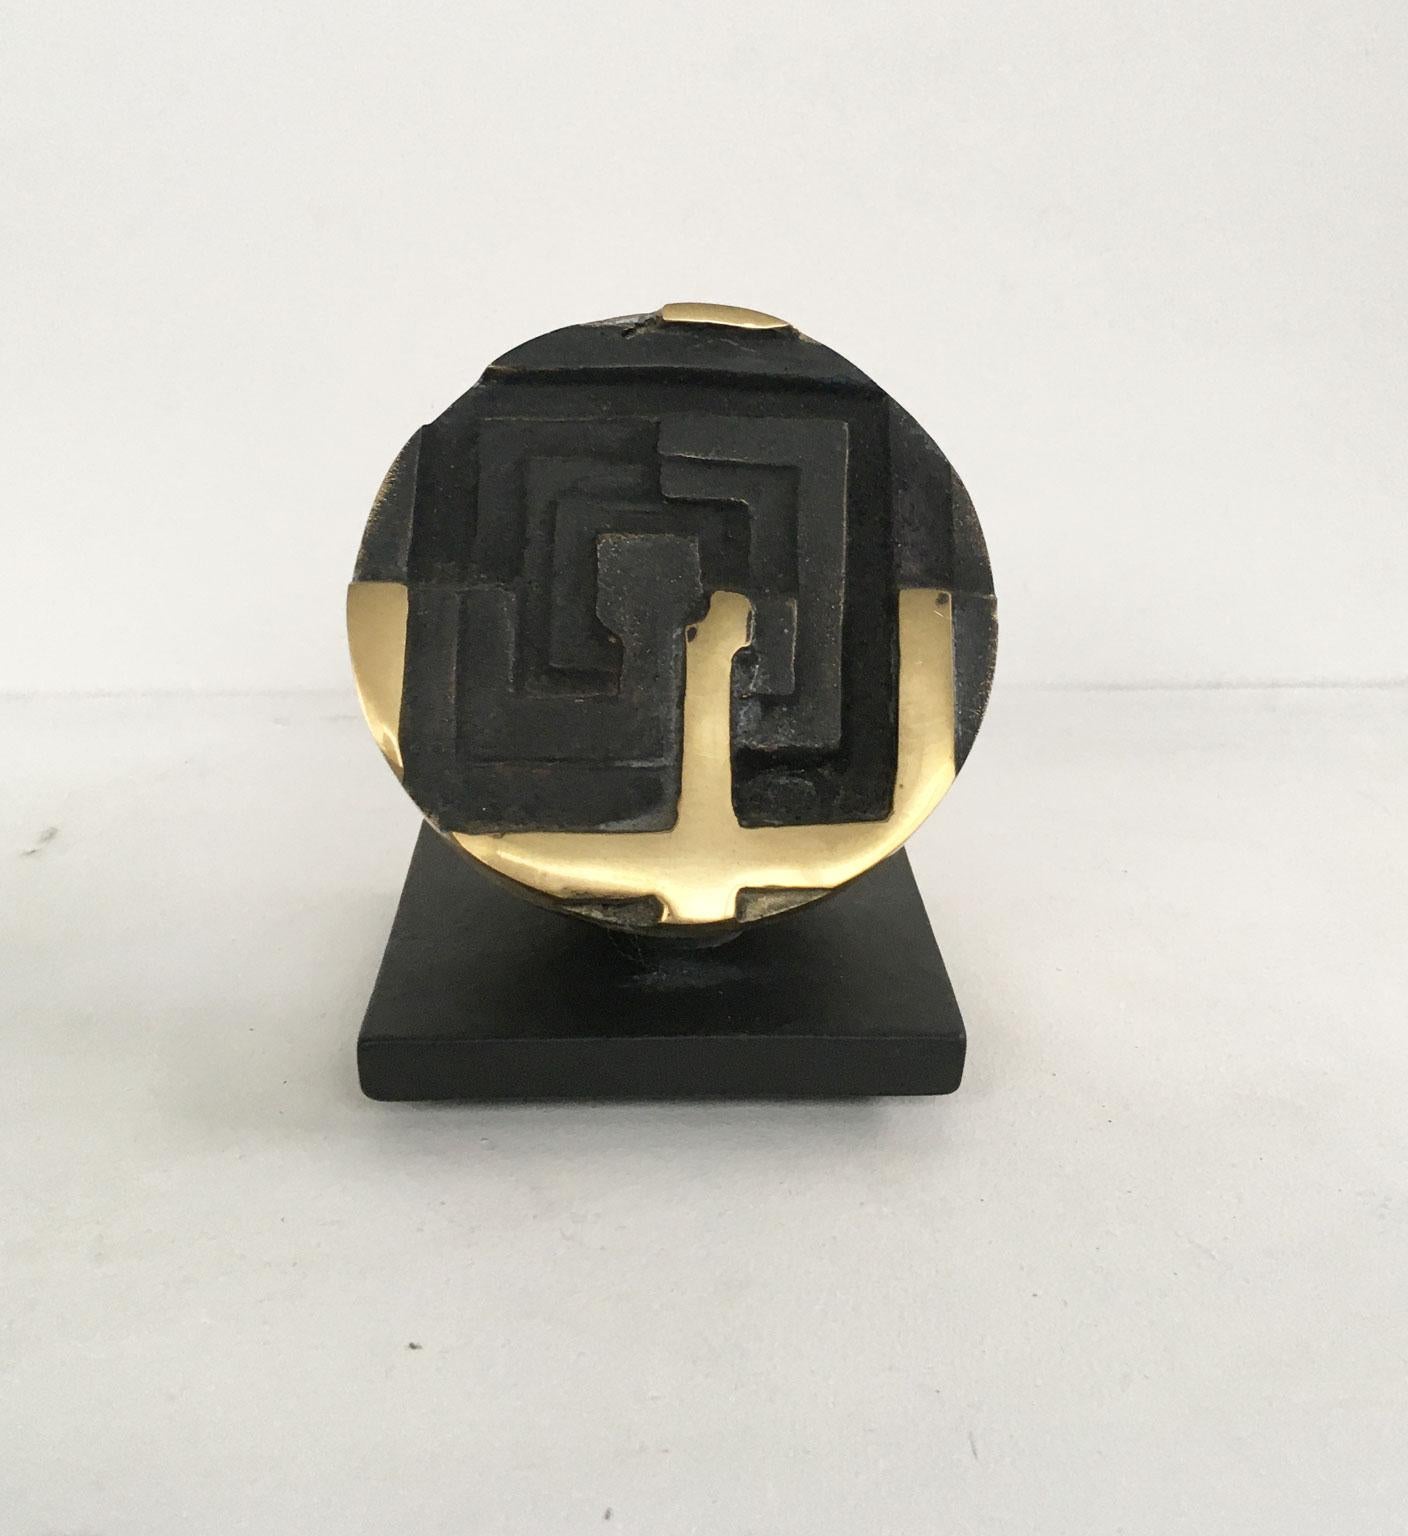 1978 Italy Bronze Abstract Sculpture by Fanna Roncoroni Labirinto Labyrinth For Sale 4